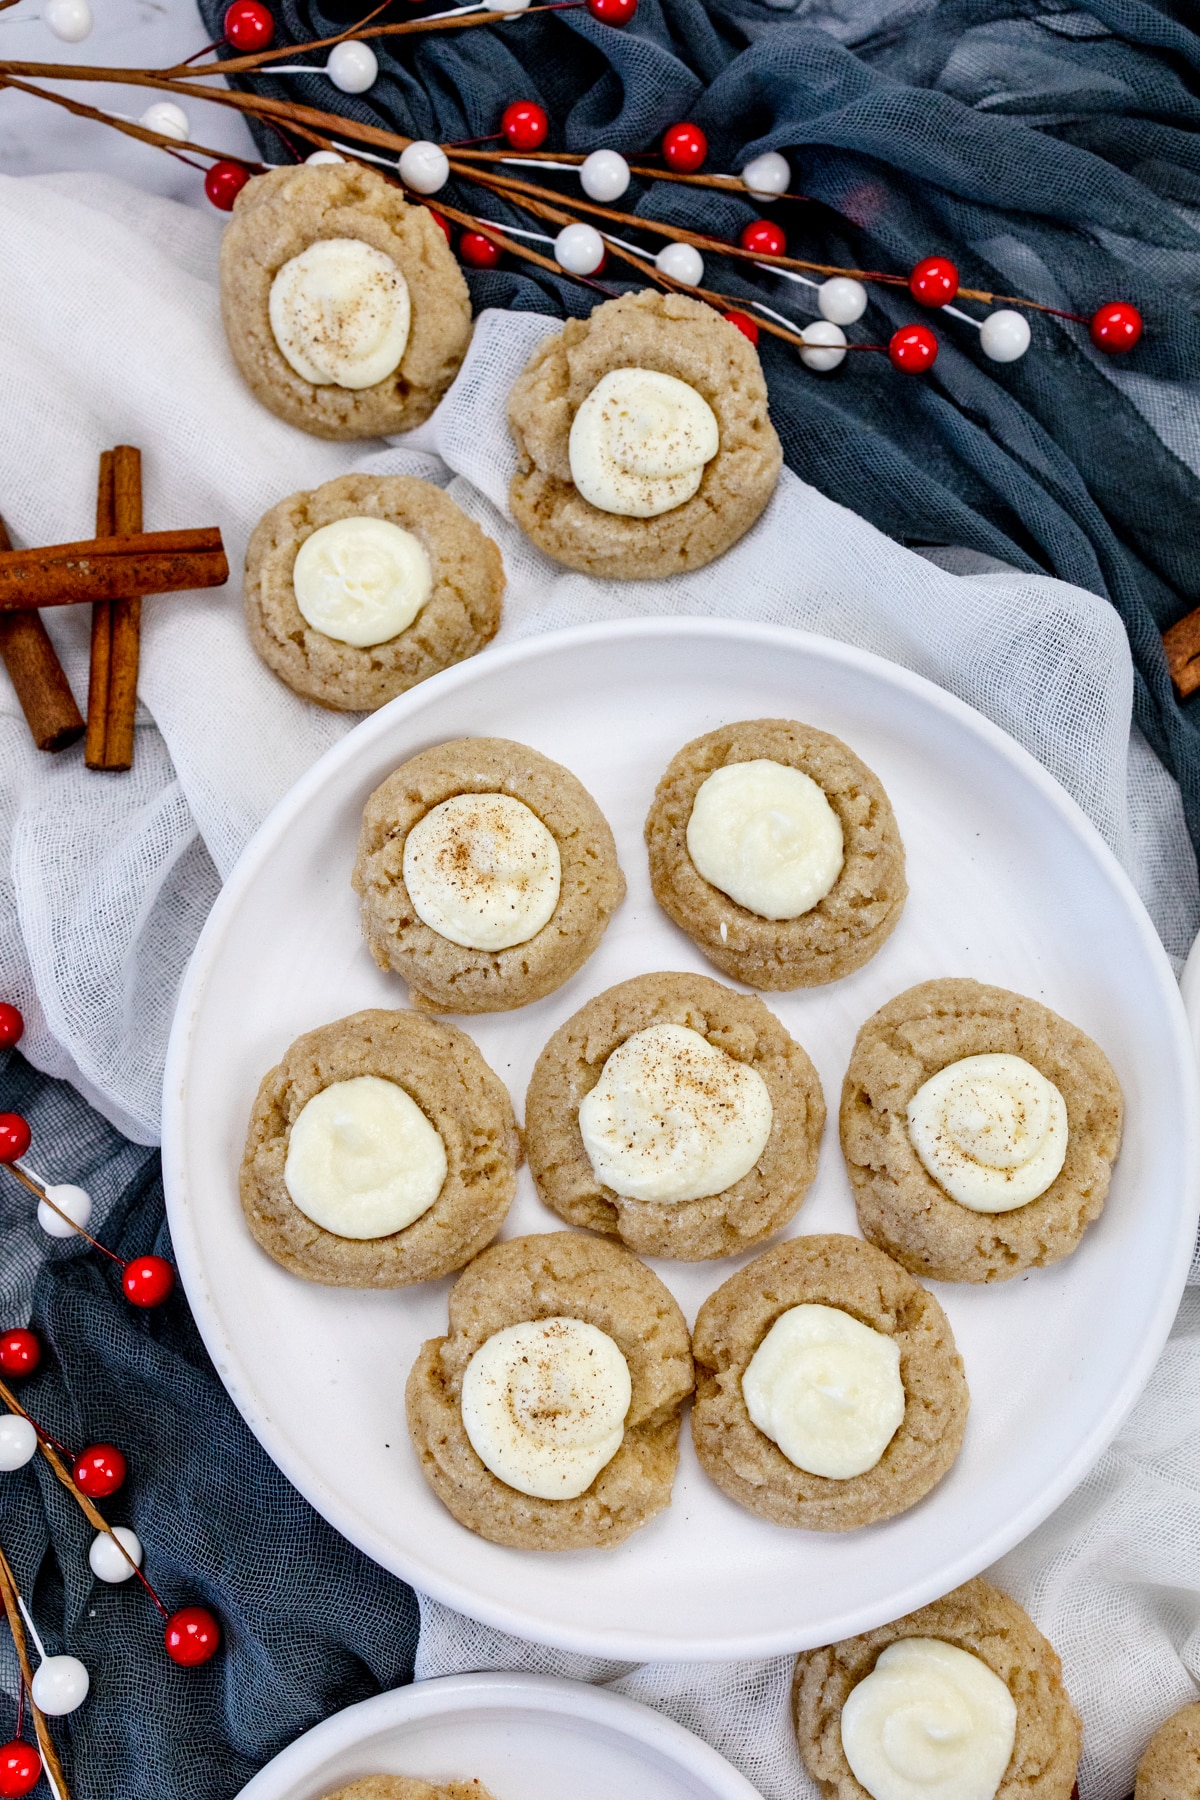 Top view of Eggnog Thumbprint Cookies on a white plate with other cookies and Christmas decorations around it.